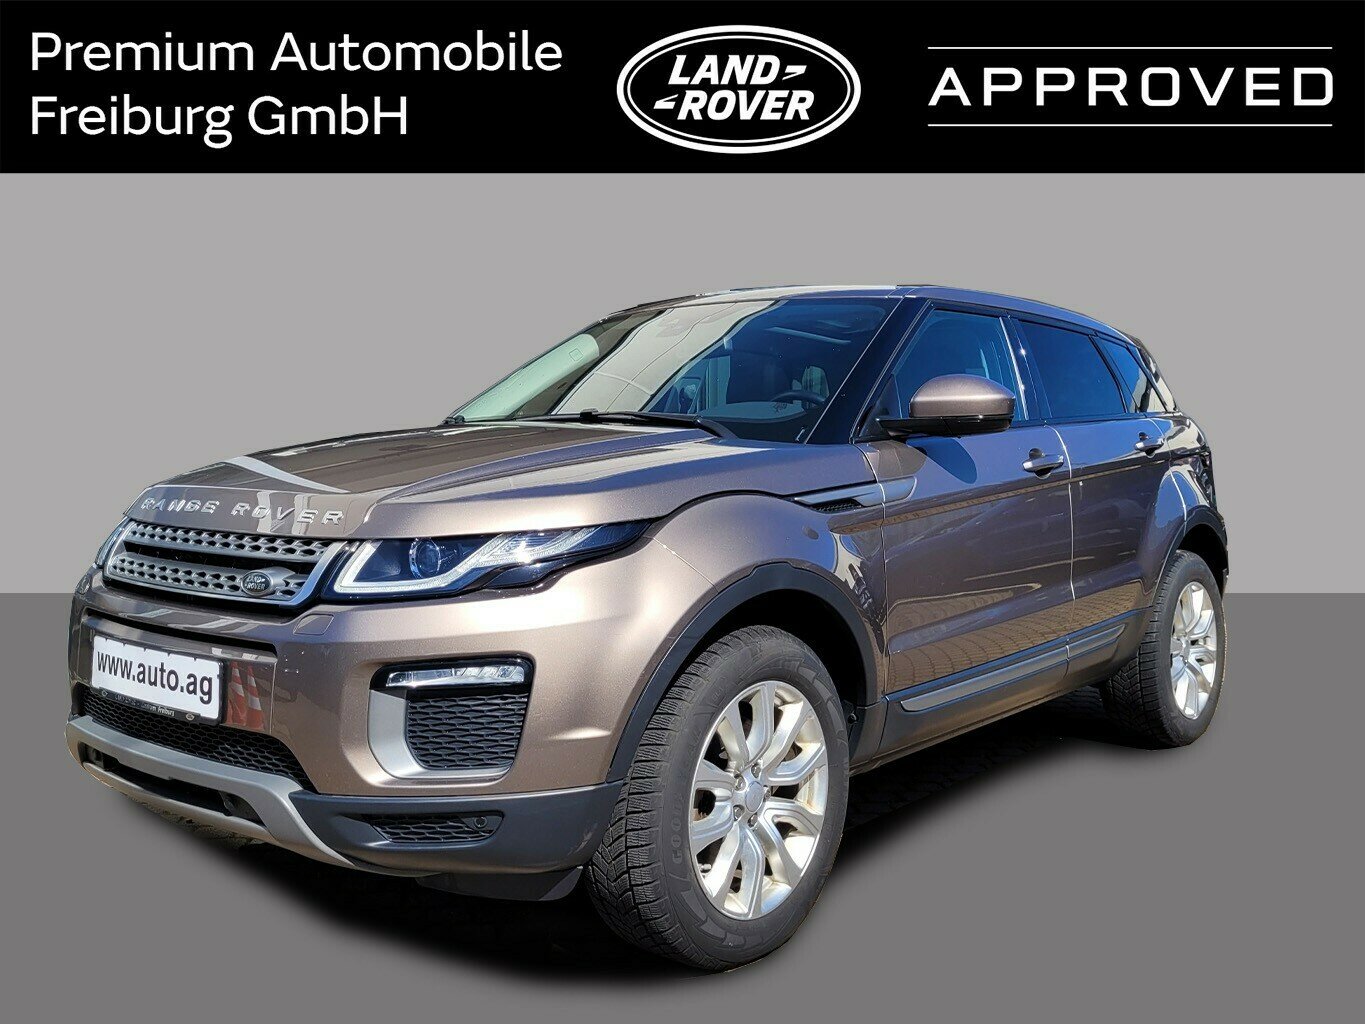 Land Rover Range Rover Evoque SE 180PS AWD APPROVED